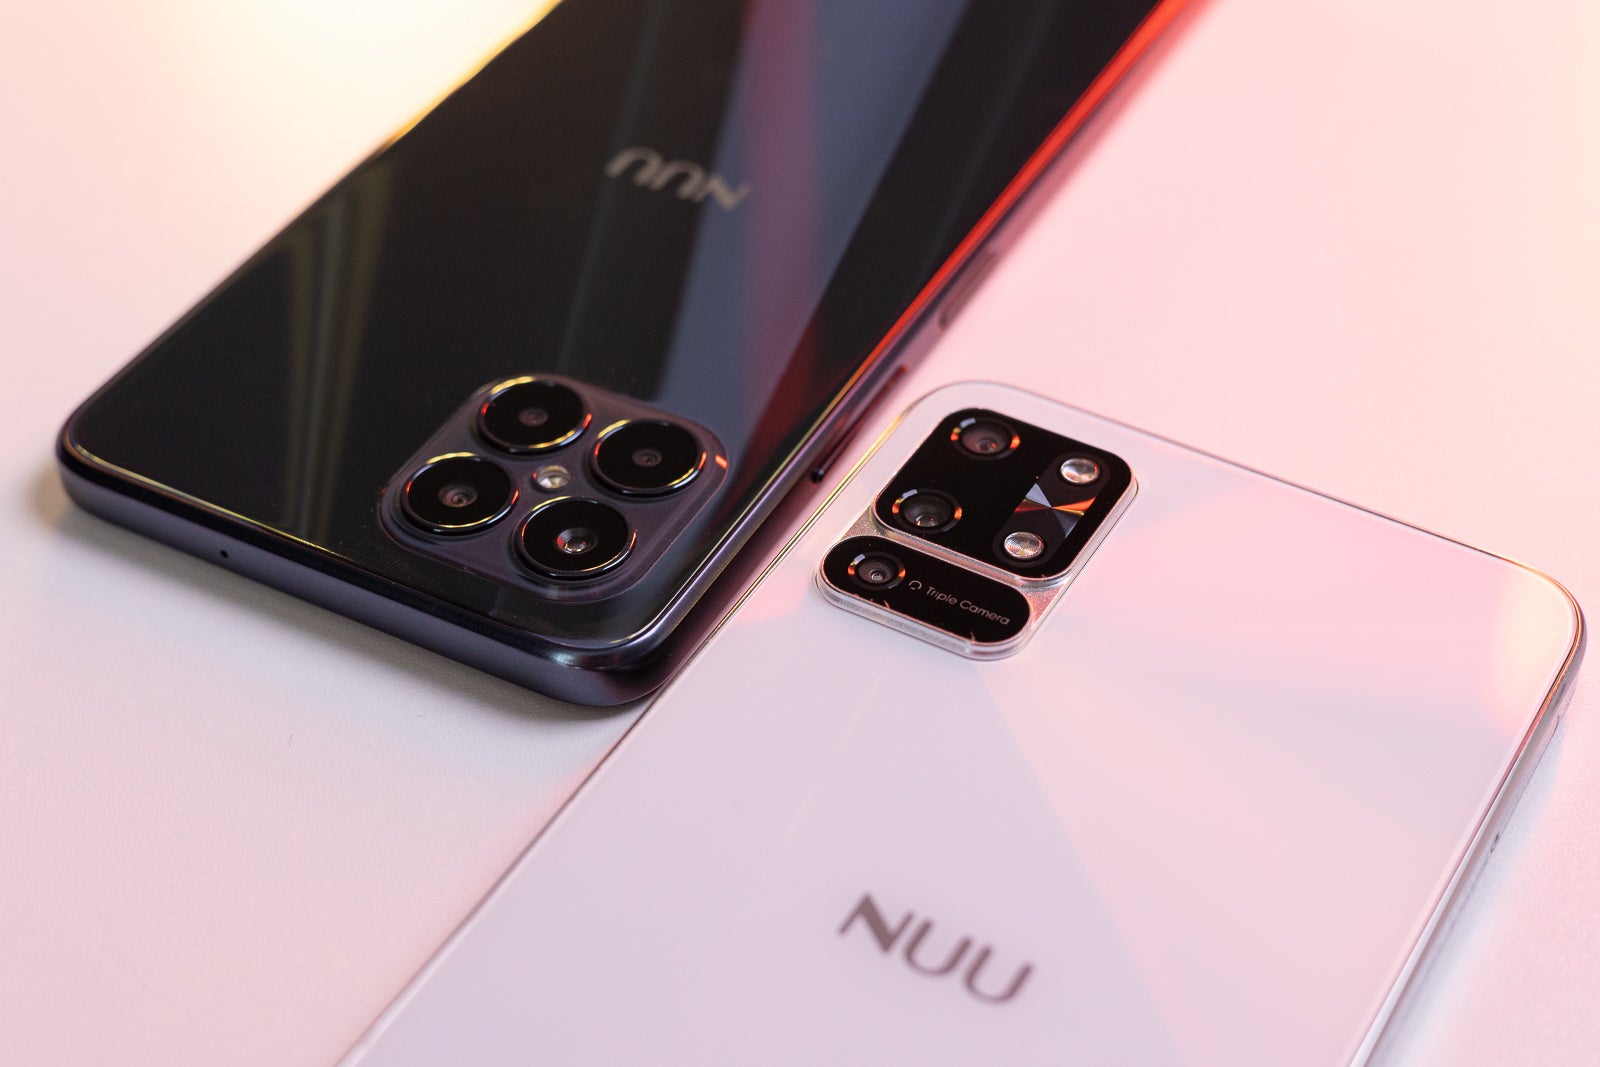 Affordable phones? Check out Nuu!